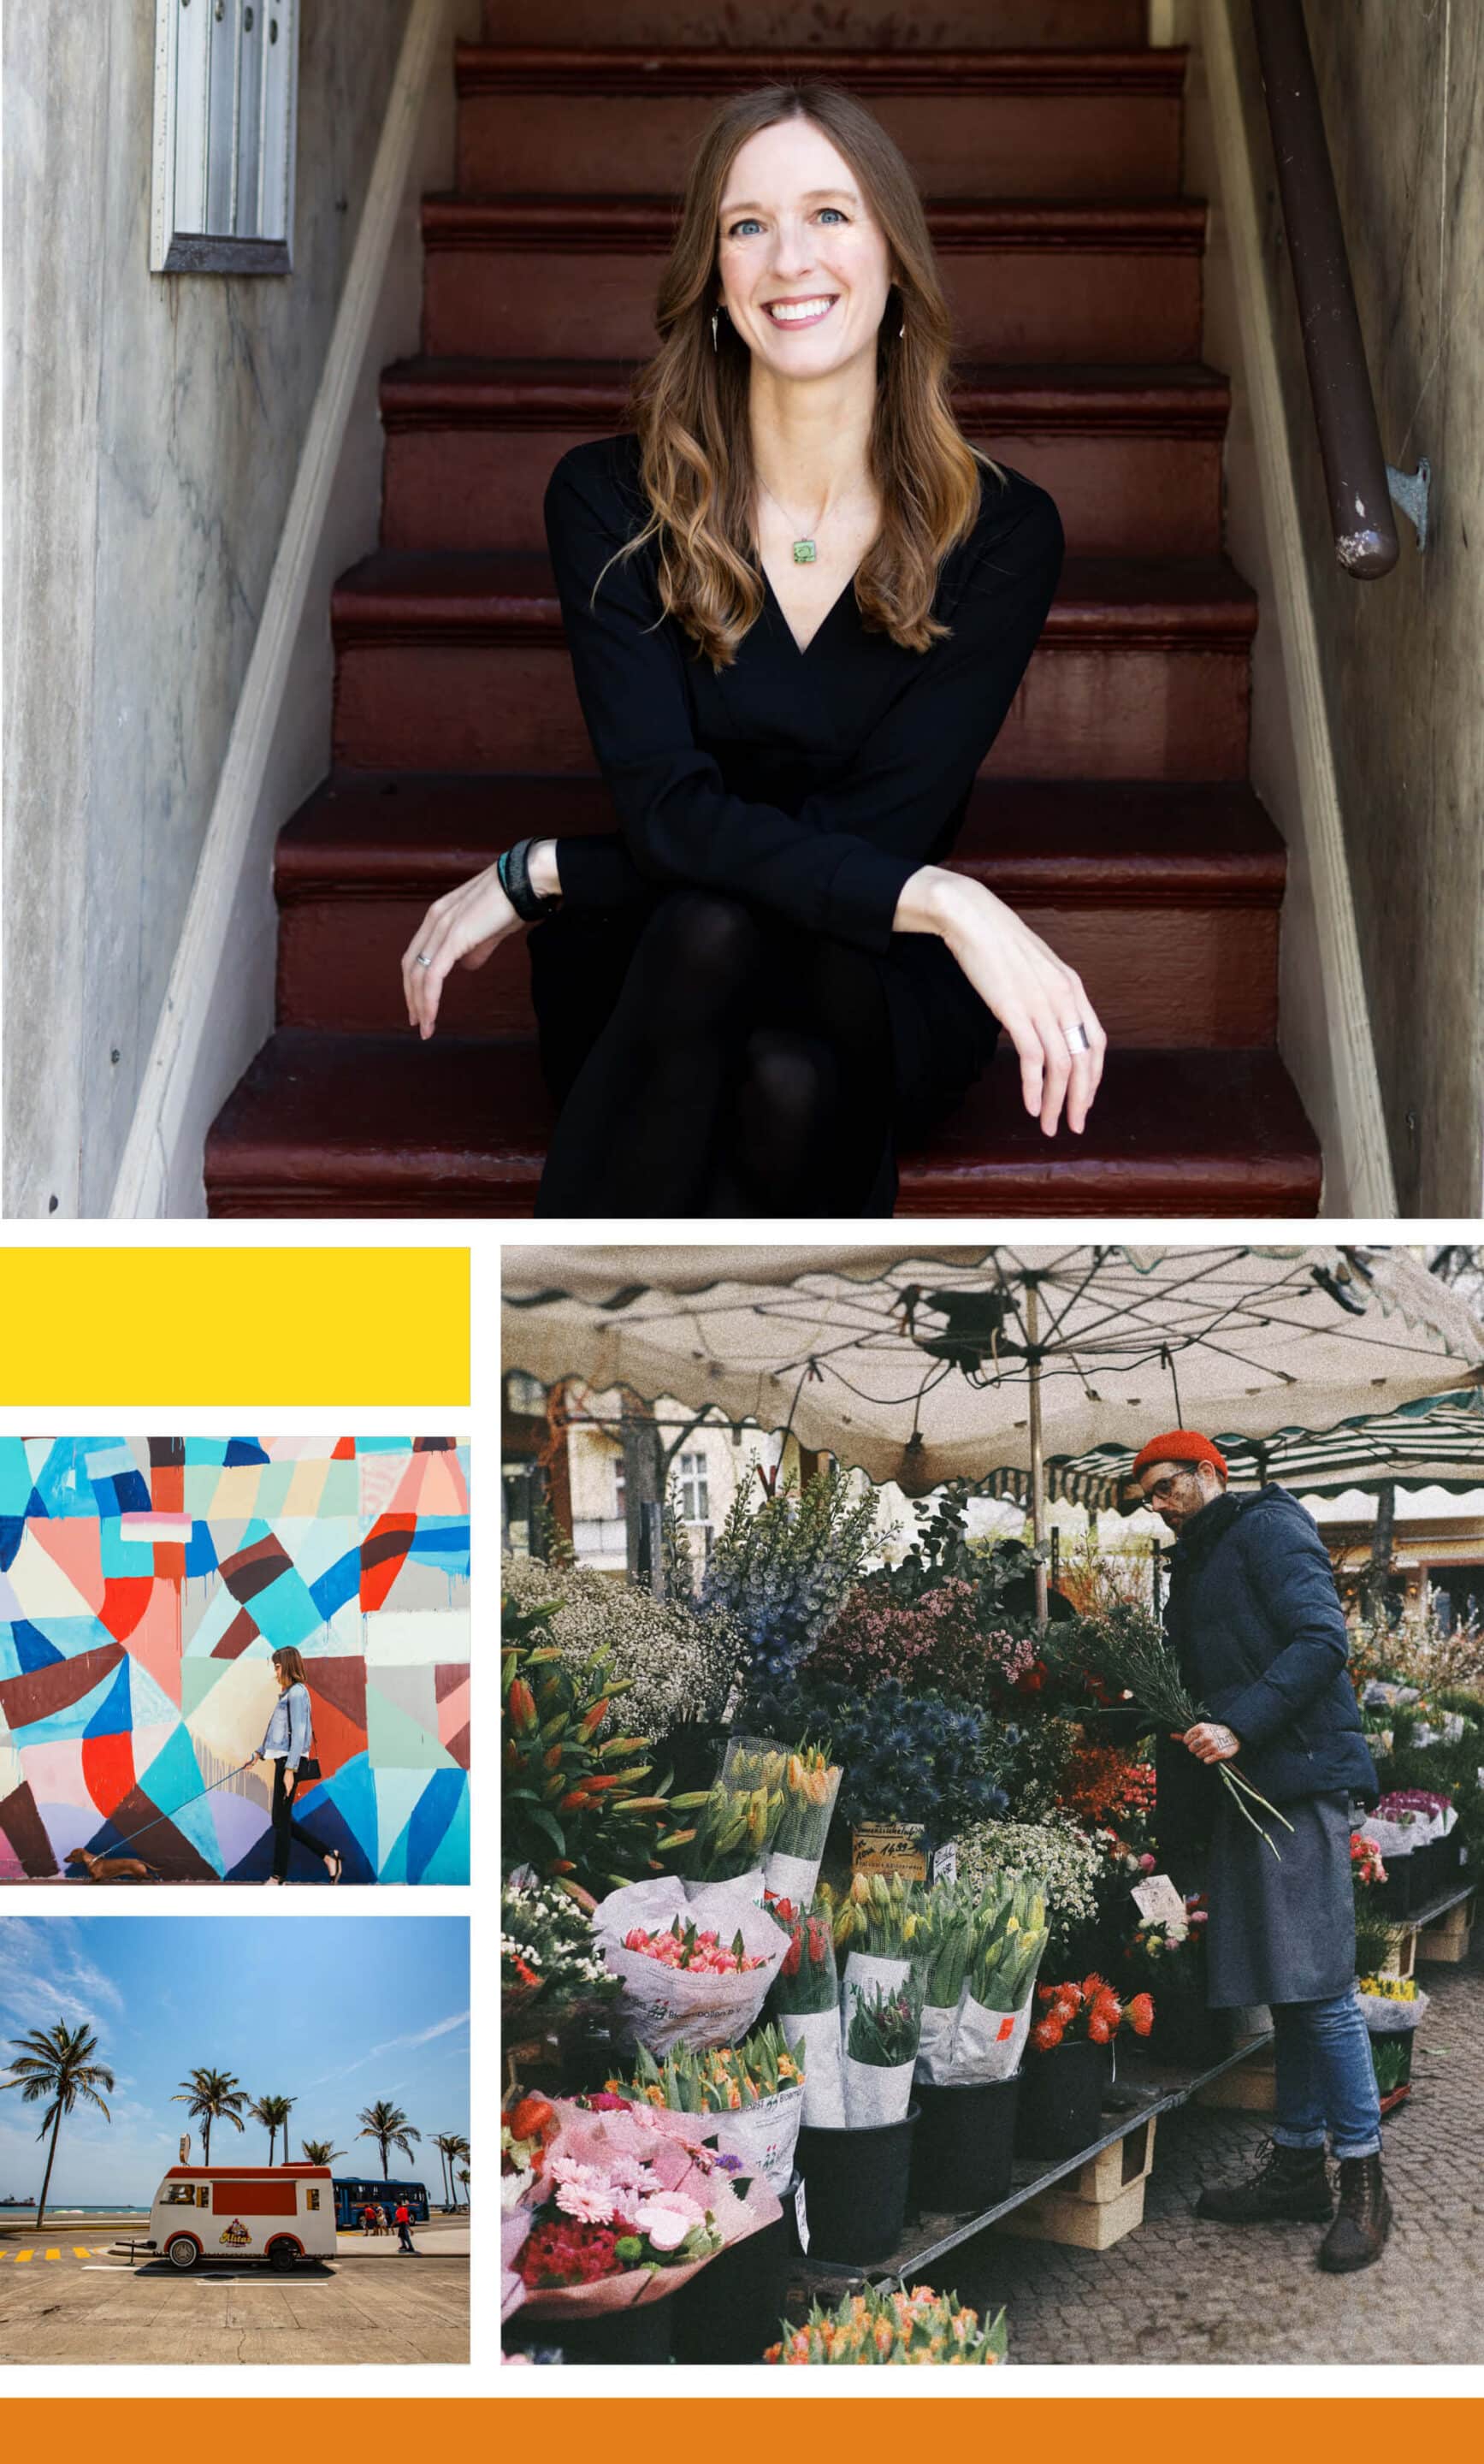 Headshot of Renee, feature writer and content editor, sitting on stairs collaged with street photography of people walking next to murals, food trucks and palm trees and a man buying flowers at a market